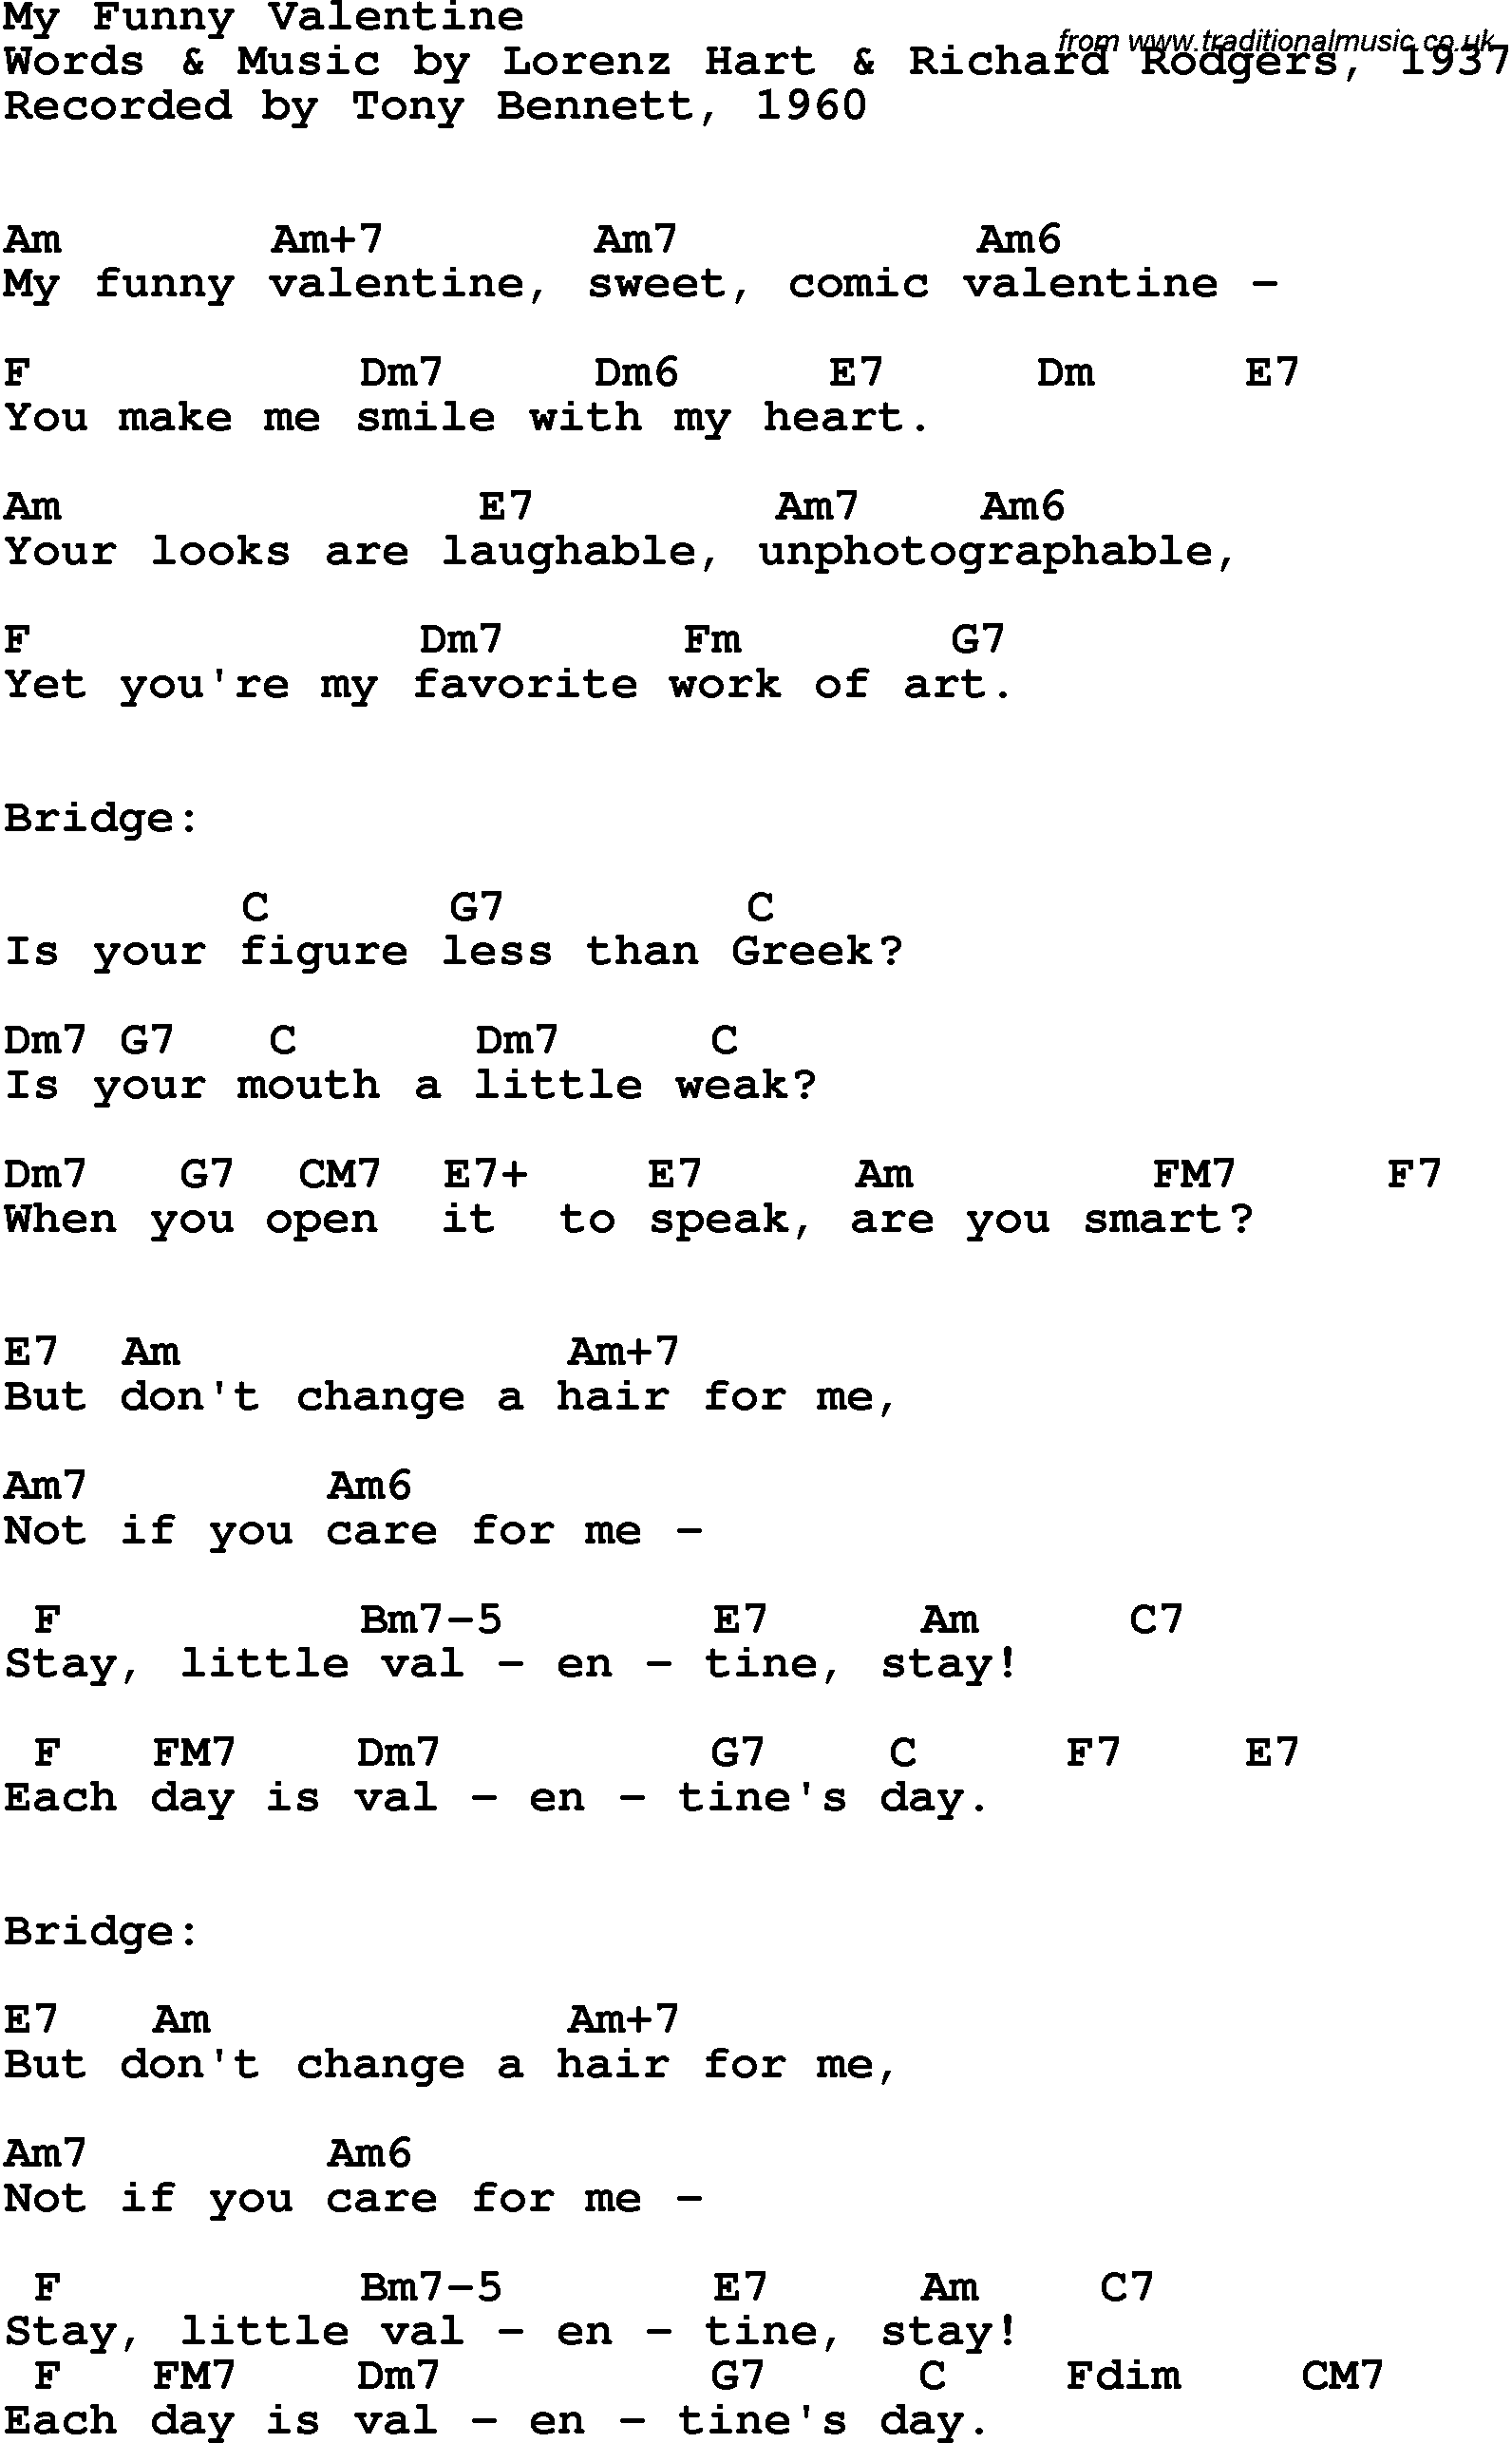 Song Lyrics with guitar chords for My Funny Valentine - Frank Sinatra, 1954